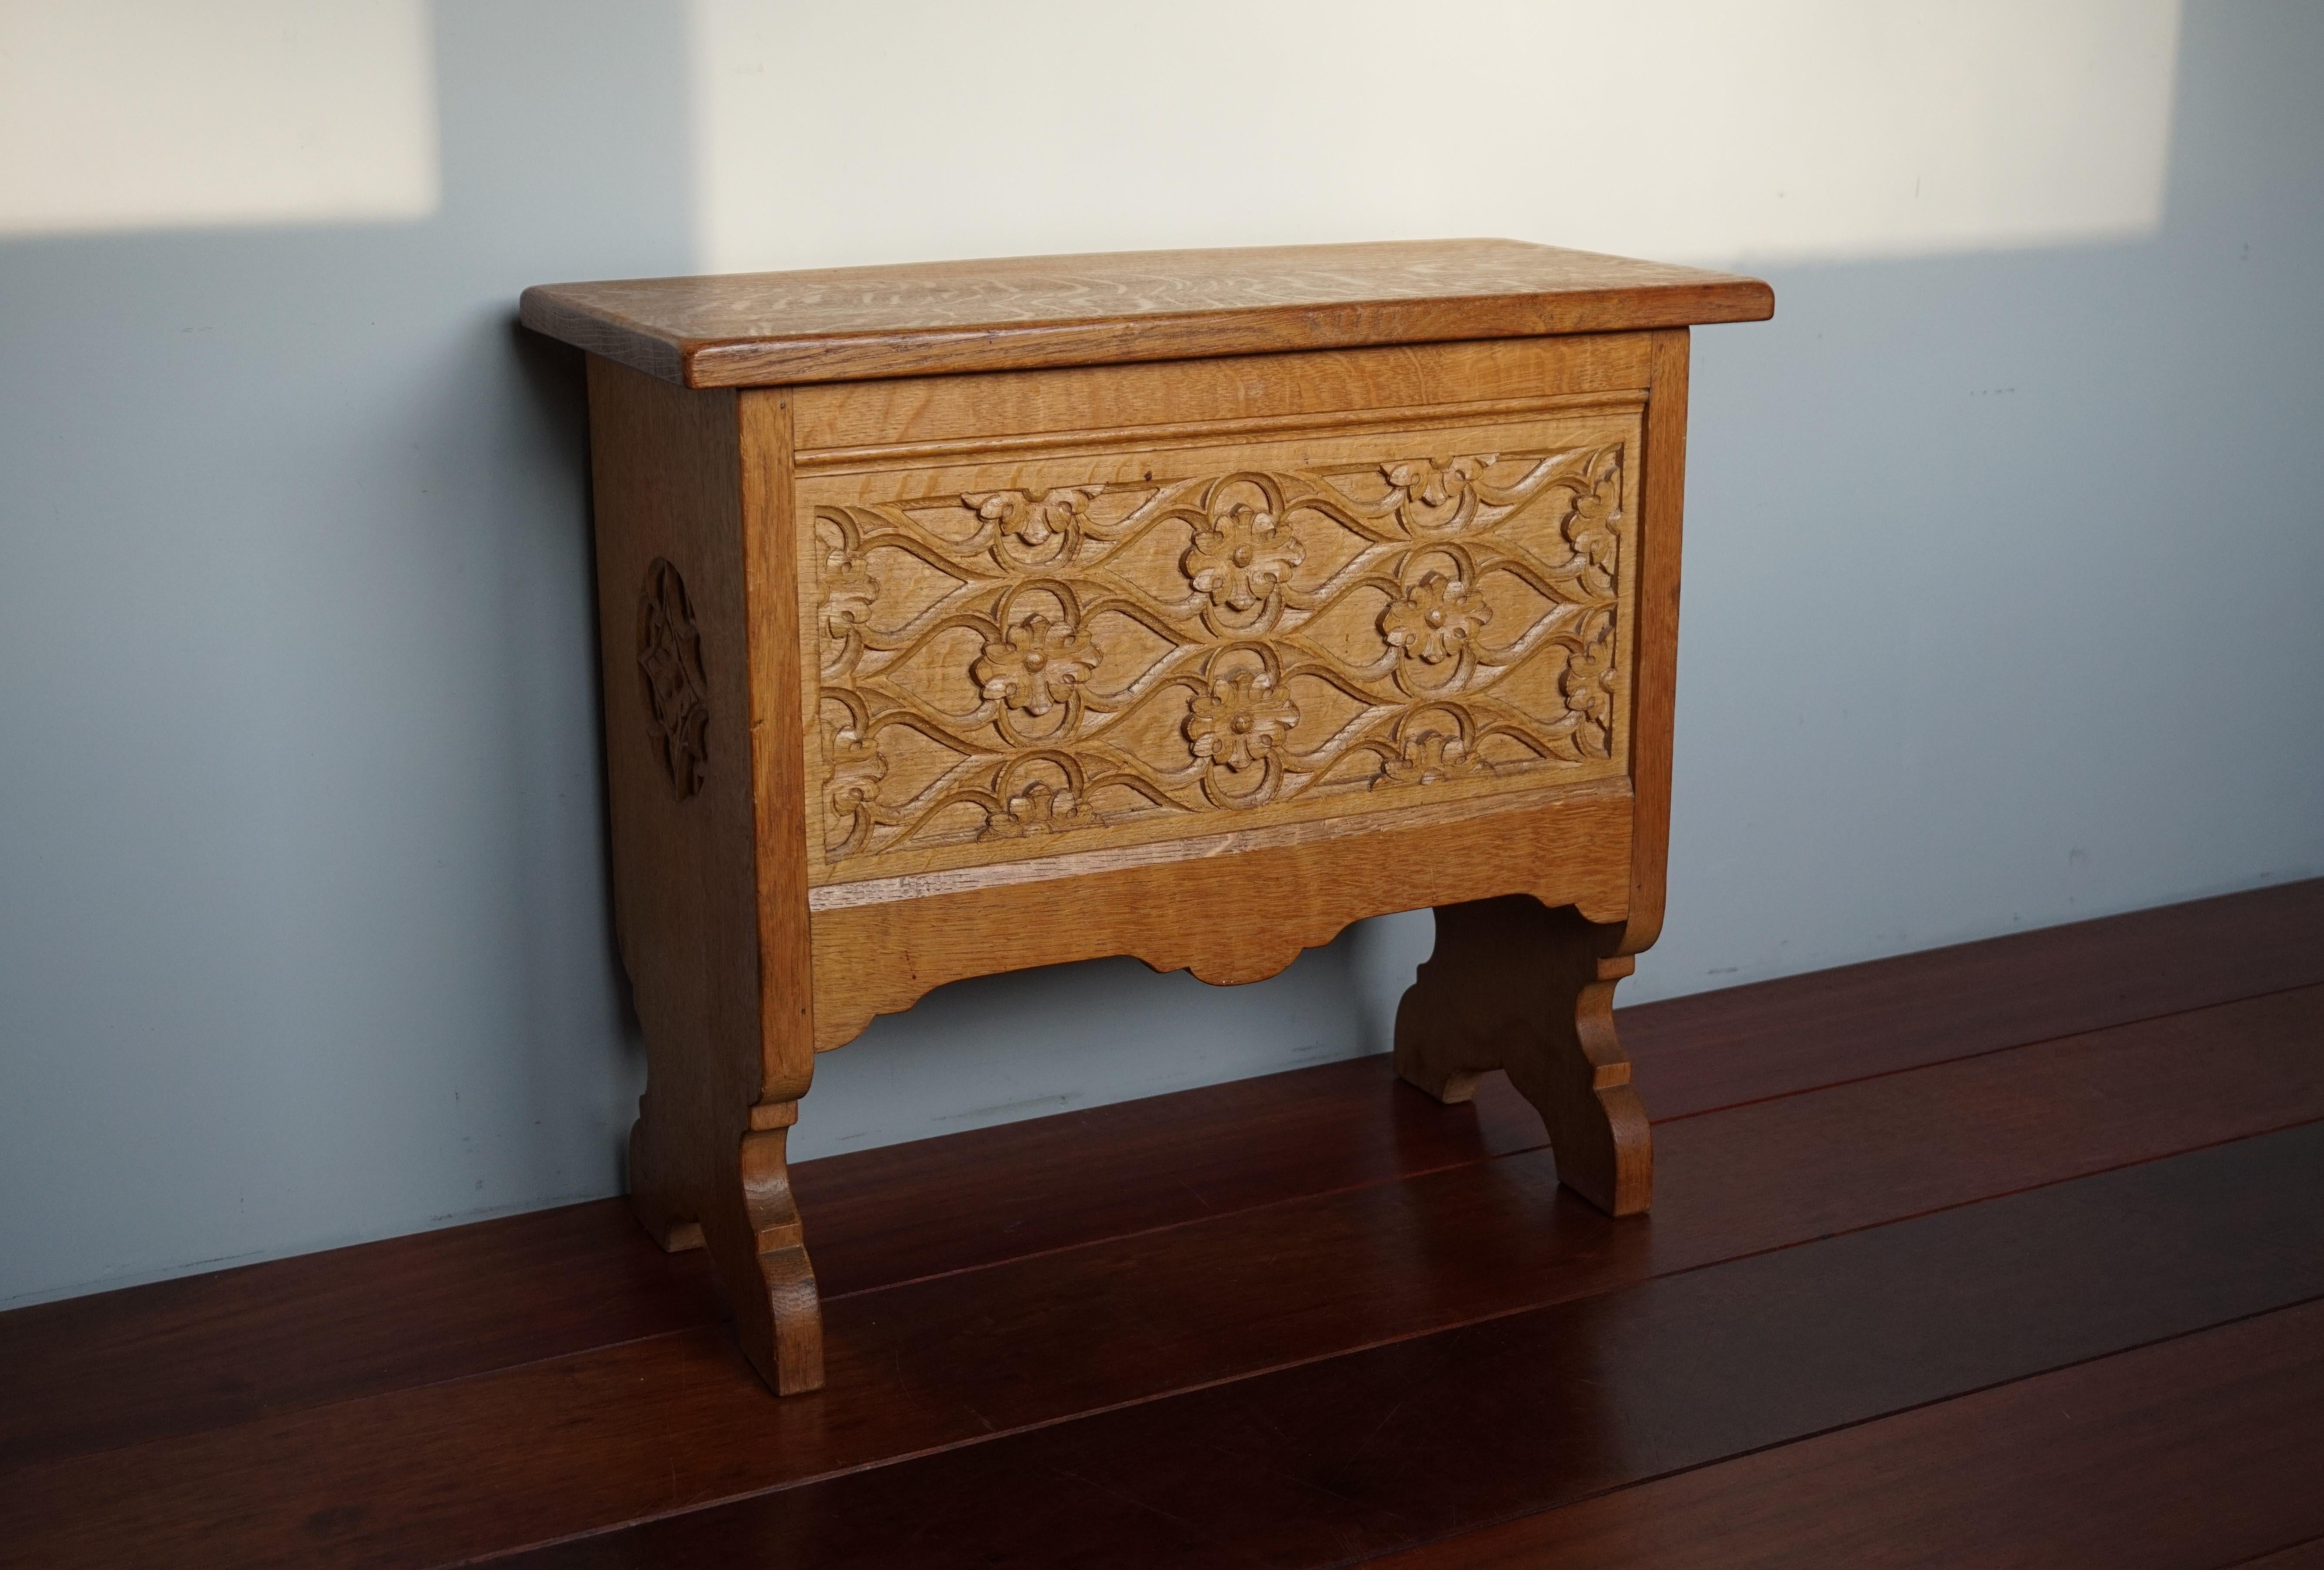 Hand-Crafted Handcrafted & Hand Carved Rare Gothic Revival Stool and Magazine Stand into One